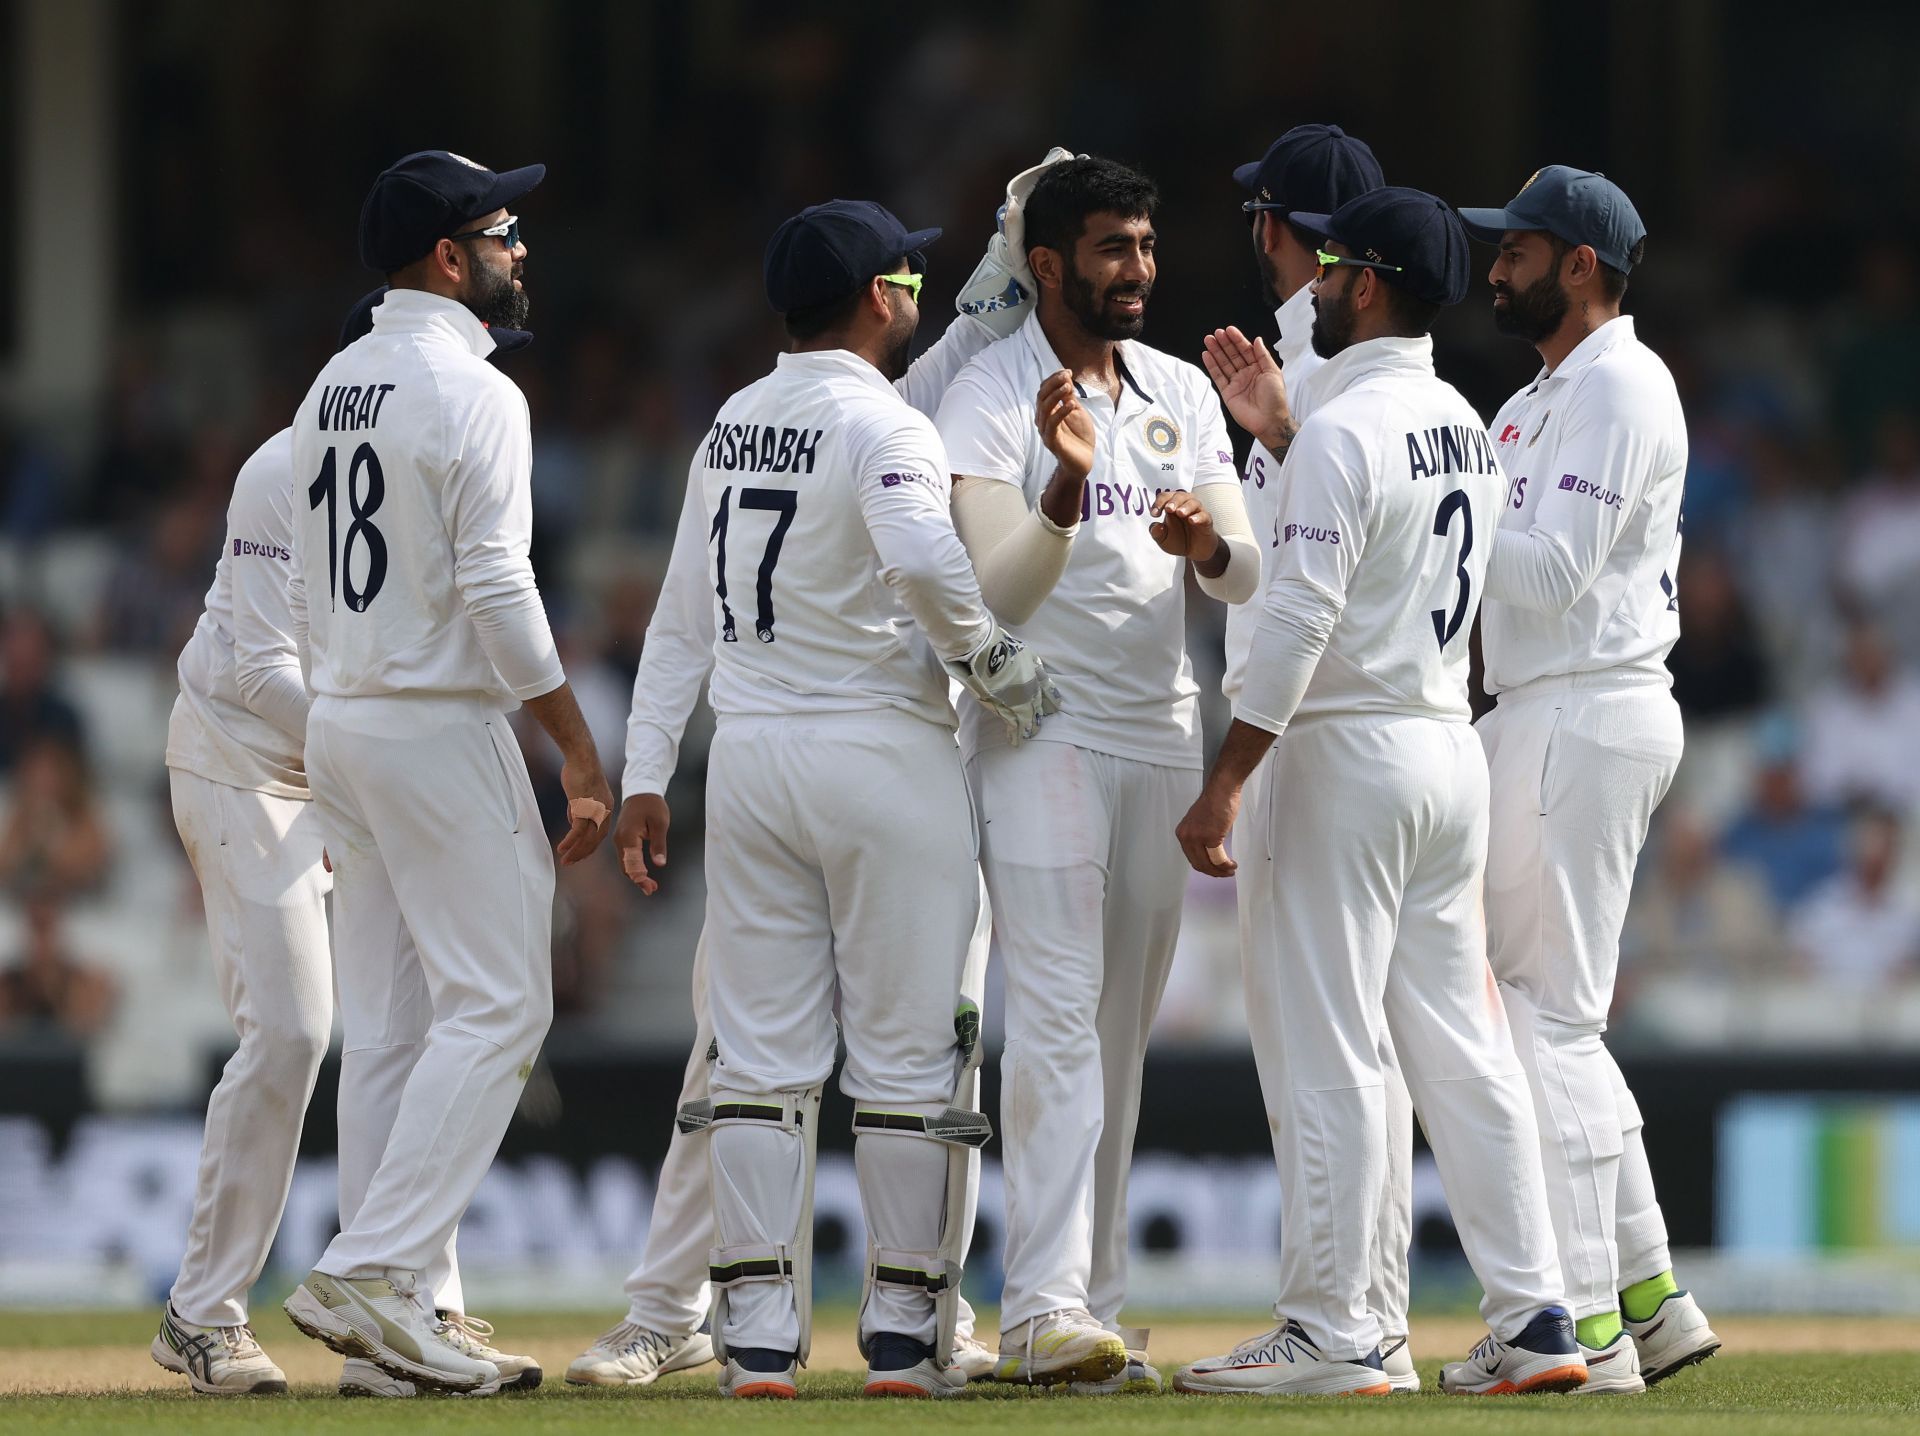 The Indian team got some valuable practice ahead of the important Test against England